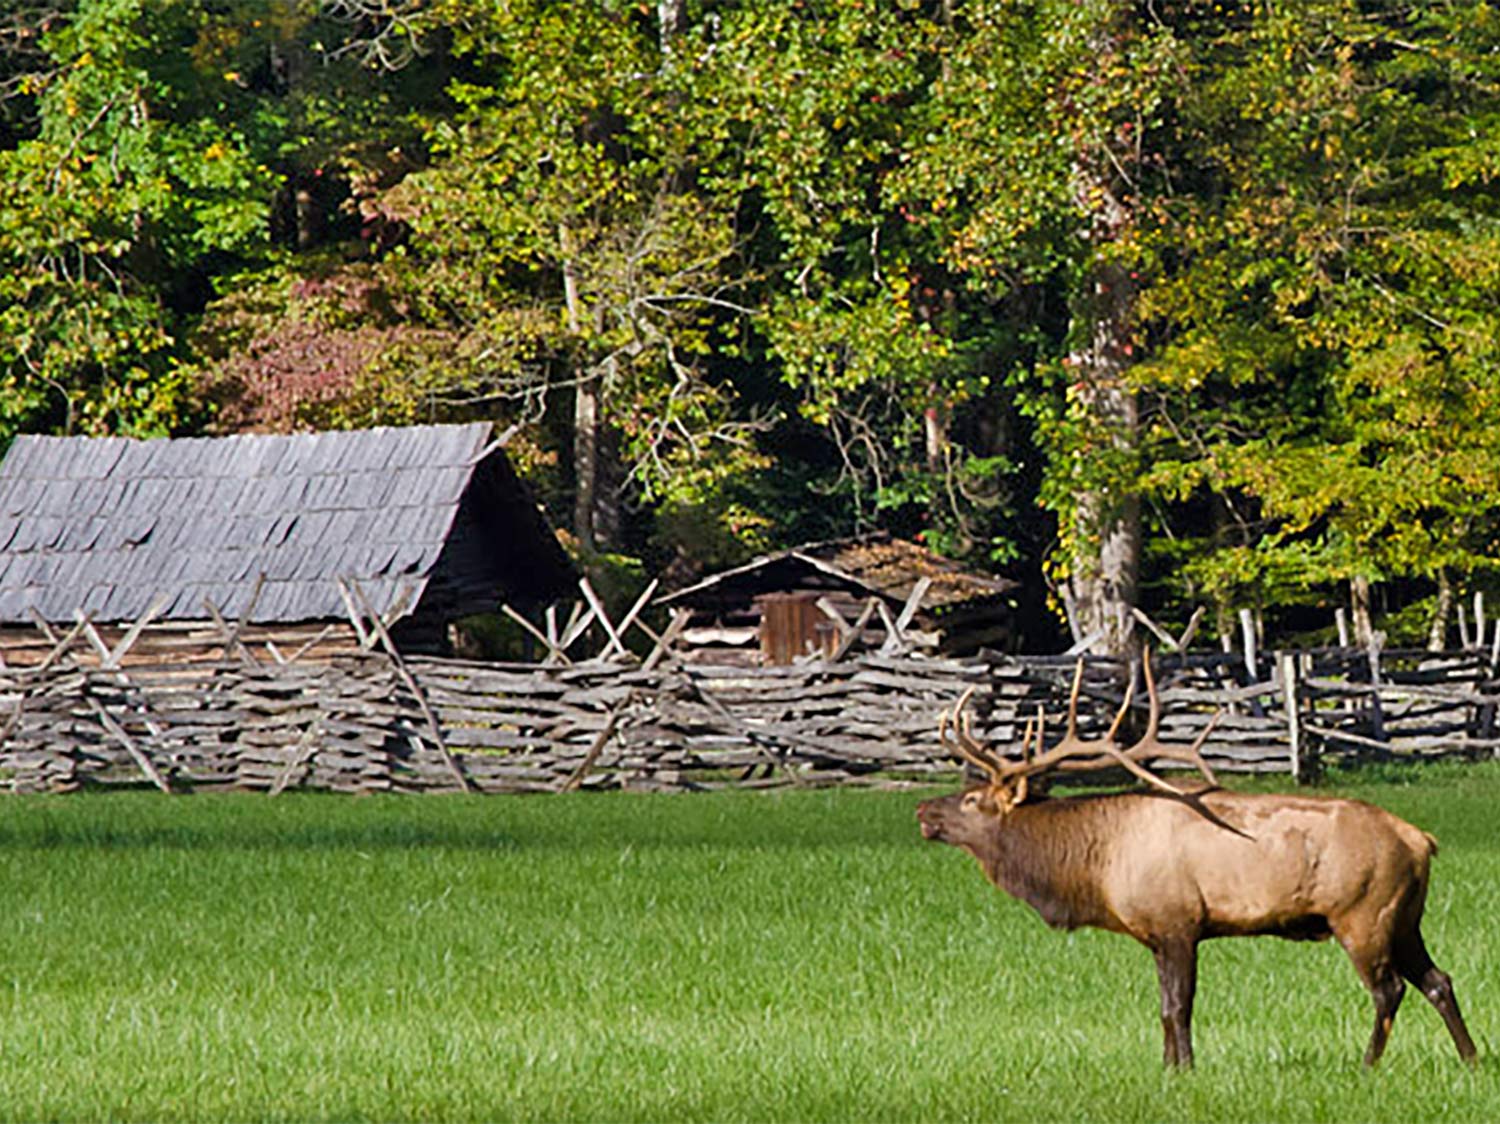 A large bull  elk walks through an open field in front of a split rail fence and farmland.